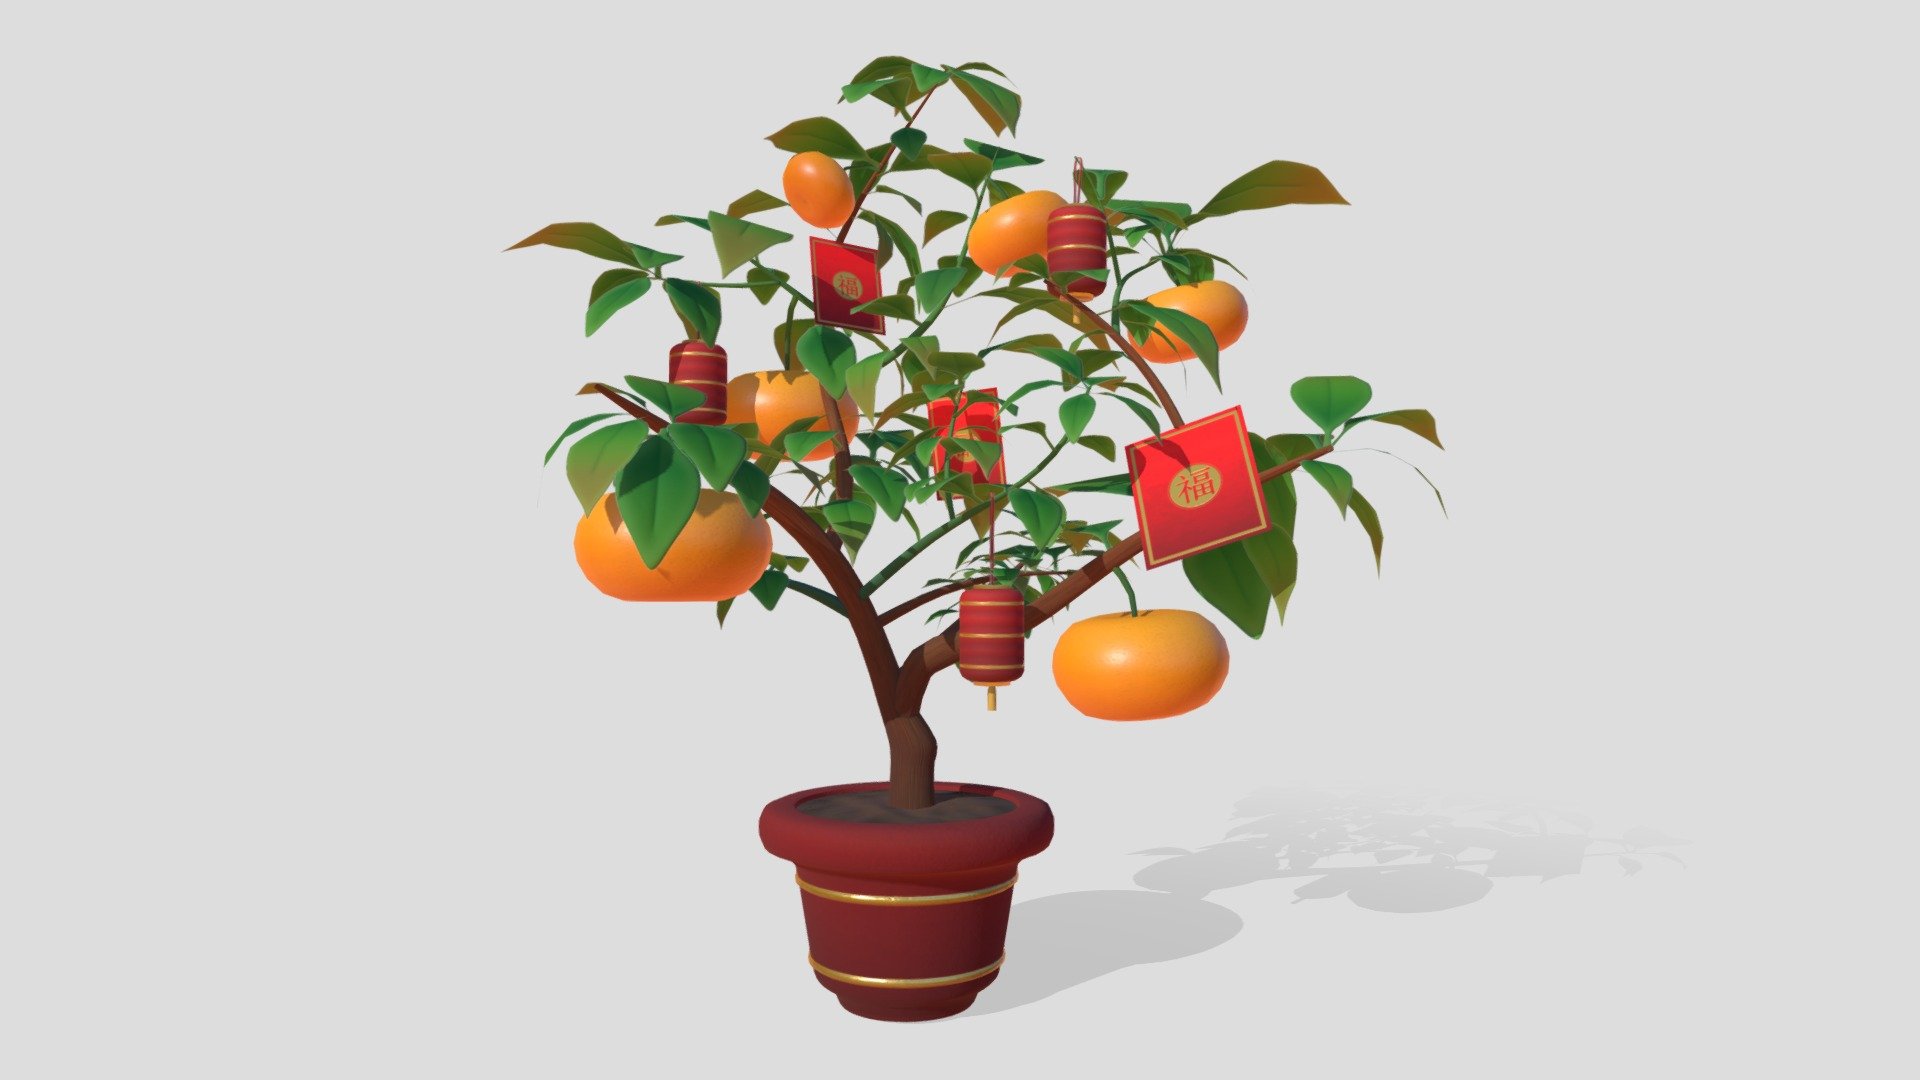 Stylised Chinese New Year tree with mini tangerines. Includes decorative hanging red packets.

Login to STB’s Tourism Information &amp; Services Hub for free downloads:
https://tih.stb.gov.sg/content/tih/en/marketing-and-media-assets/digital-images-andvideoslisting/digital-images-and-videos-detail.104f29cee68aacc44ce9175a5824e5b931b.Kumquat+Tree.html - Kumquat Tree - 3D model by STB-TC 3d model